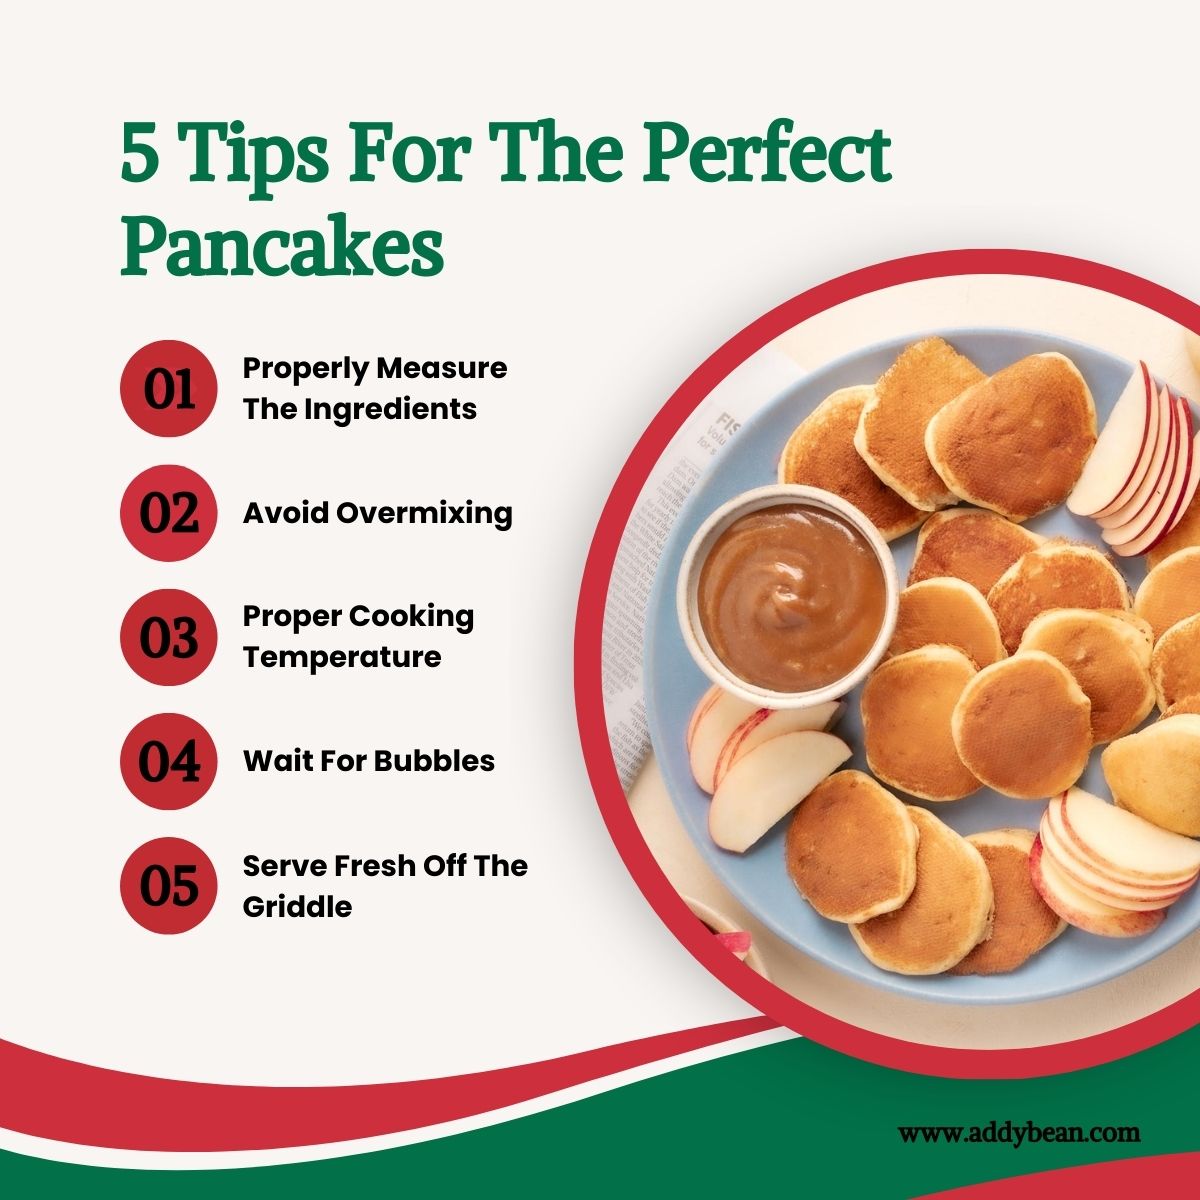 5 tips for the perfect pancakes